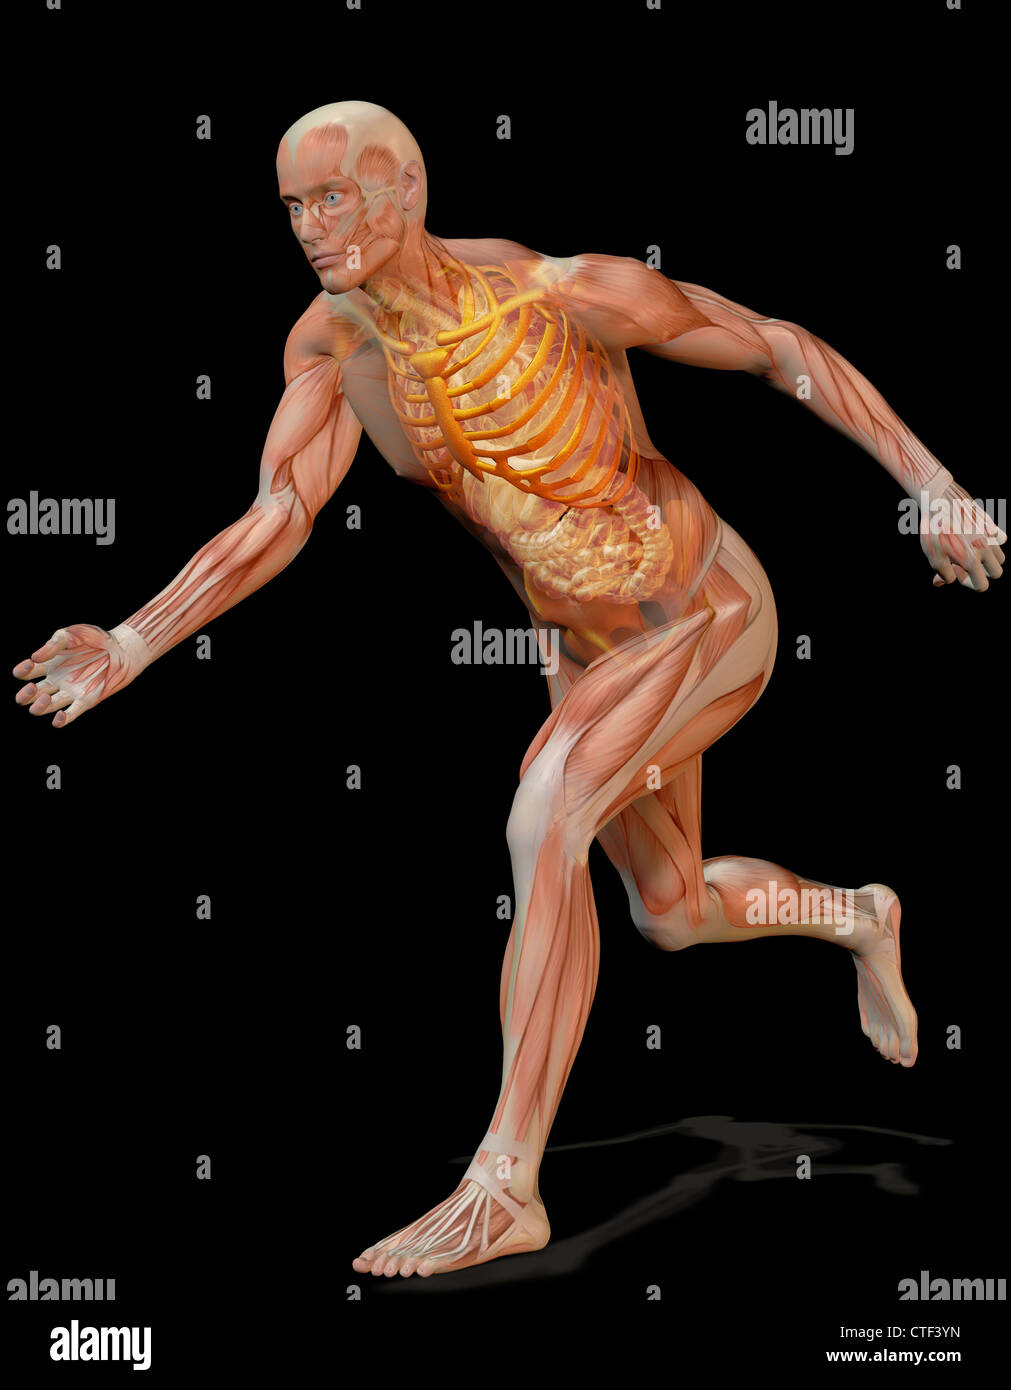 Digitally generated image of running human representation with inner human muscle visible Stock Photo